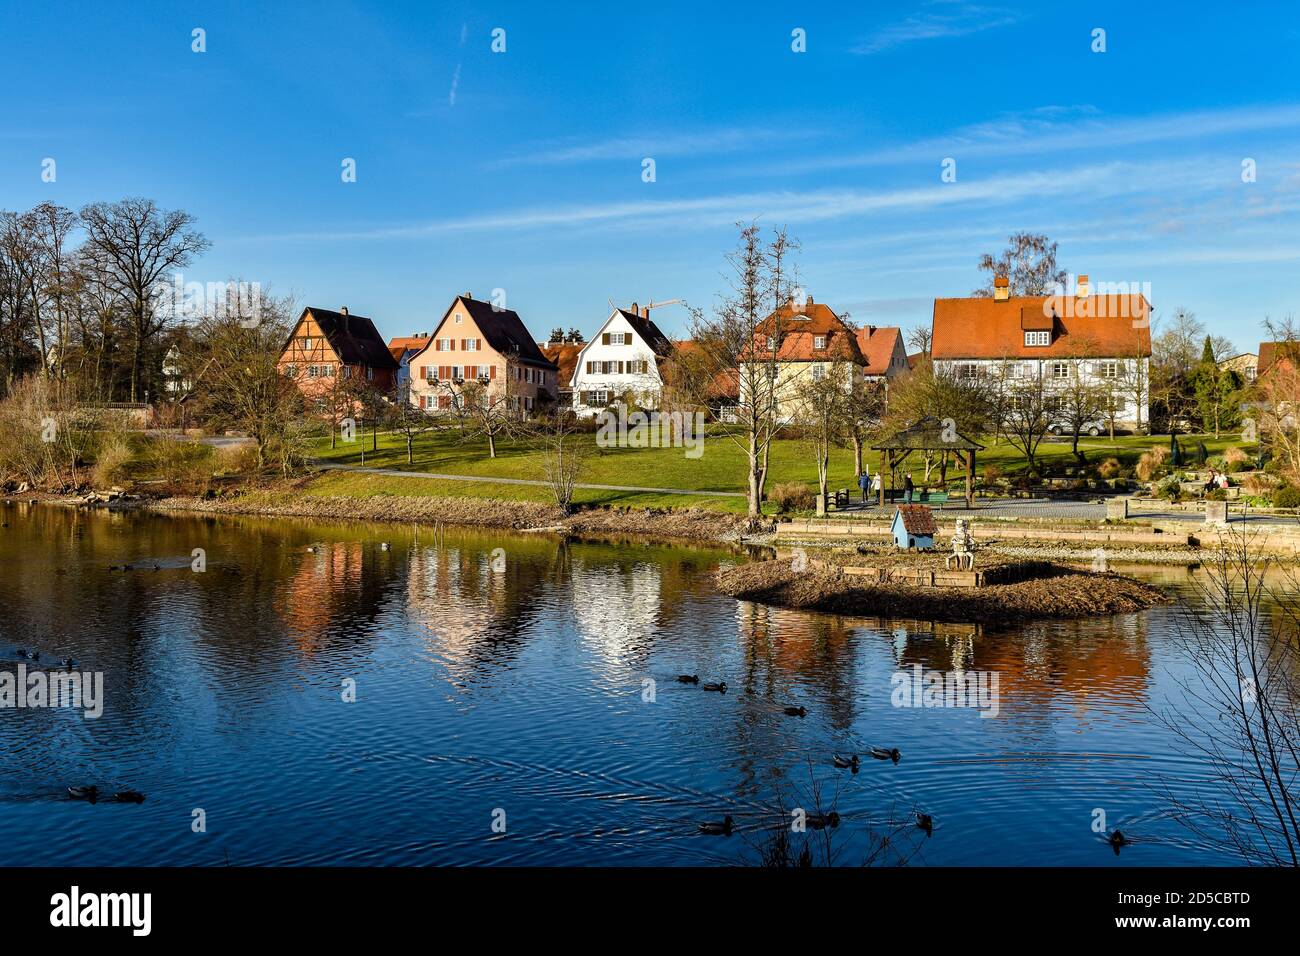 Dinkelsbühl at christmass time. Colorful Half-Timbered  house, houses, lake, blue sky. Baden-Wurttemberg, Germany. Stock Photo